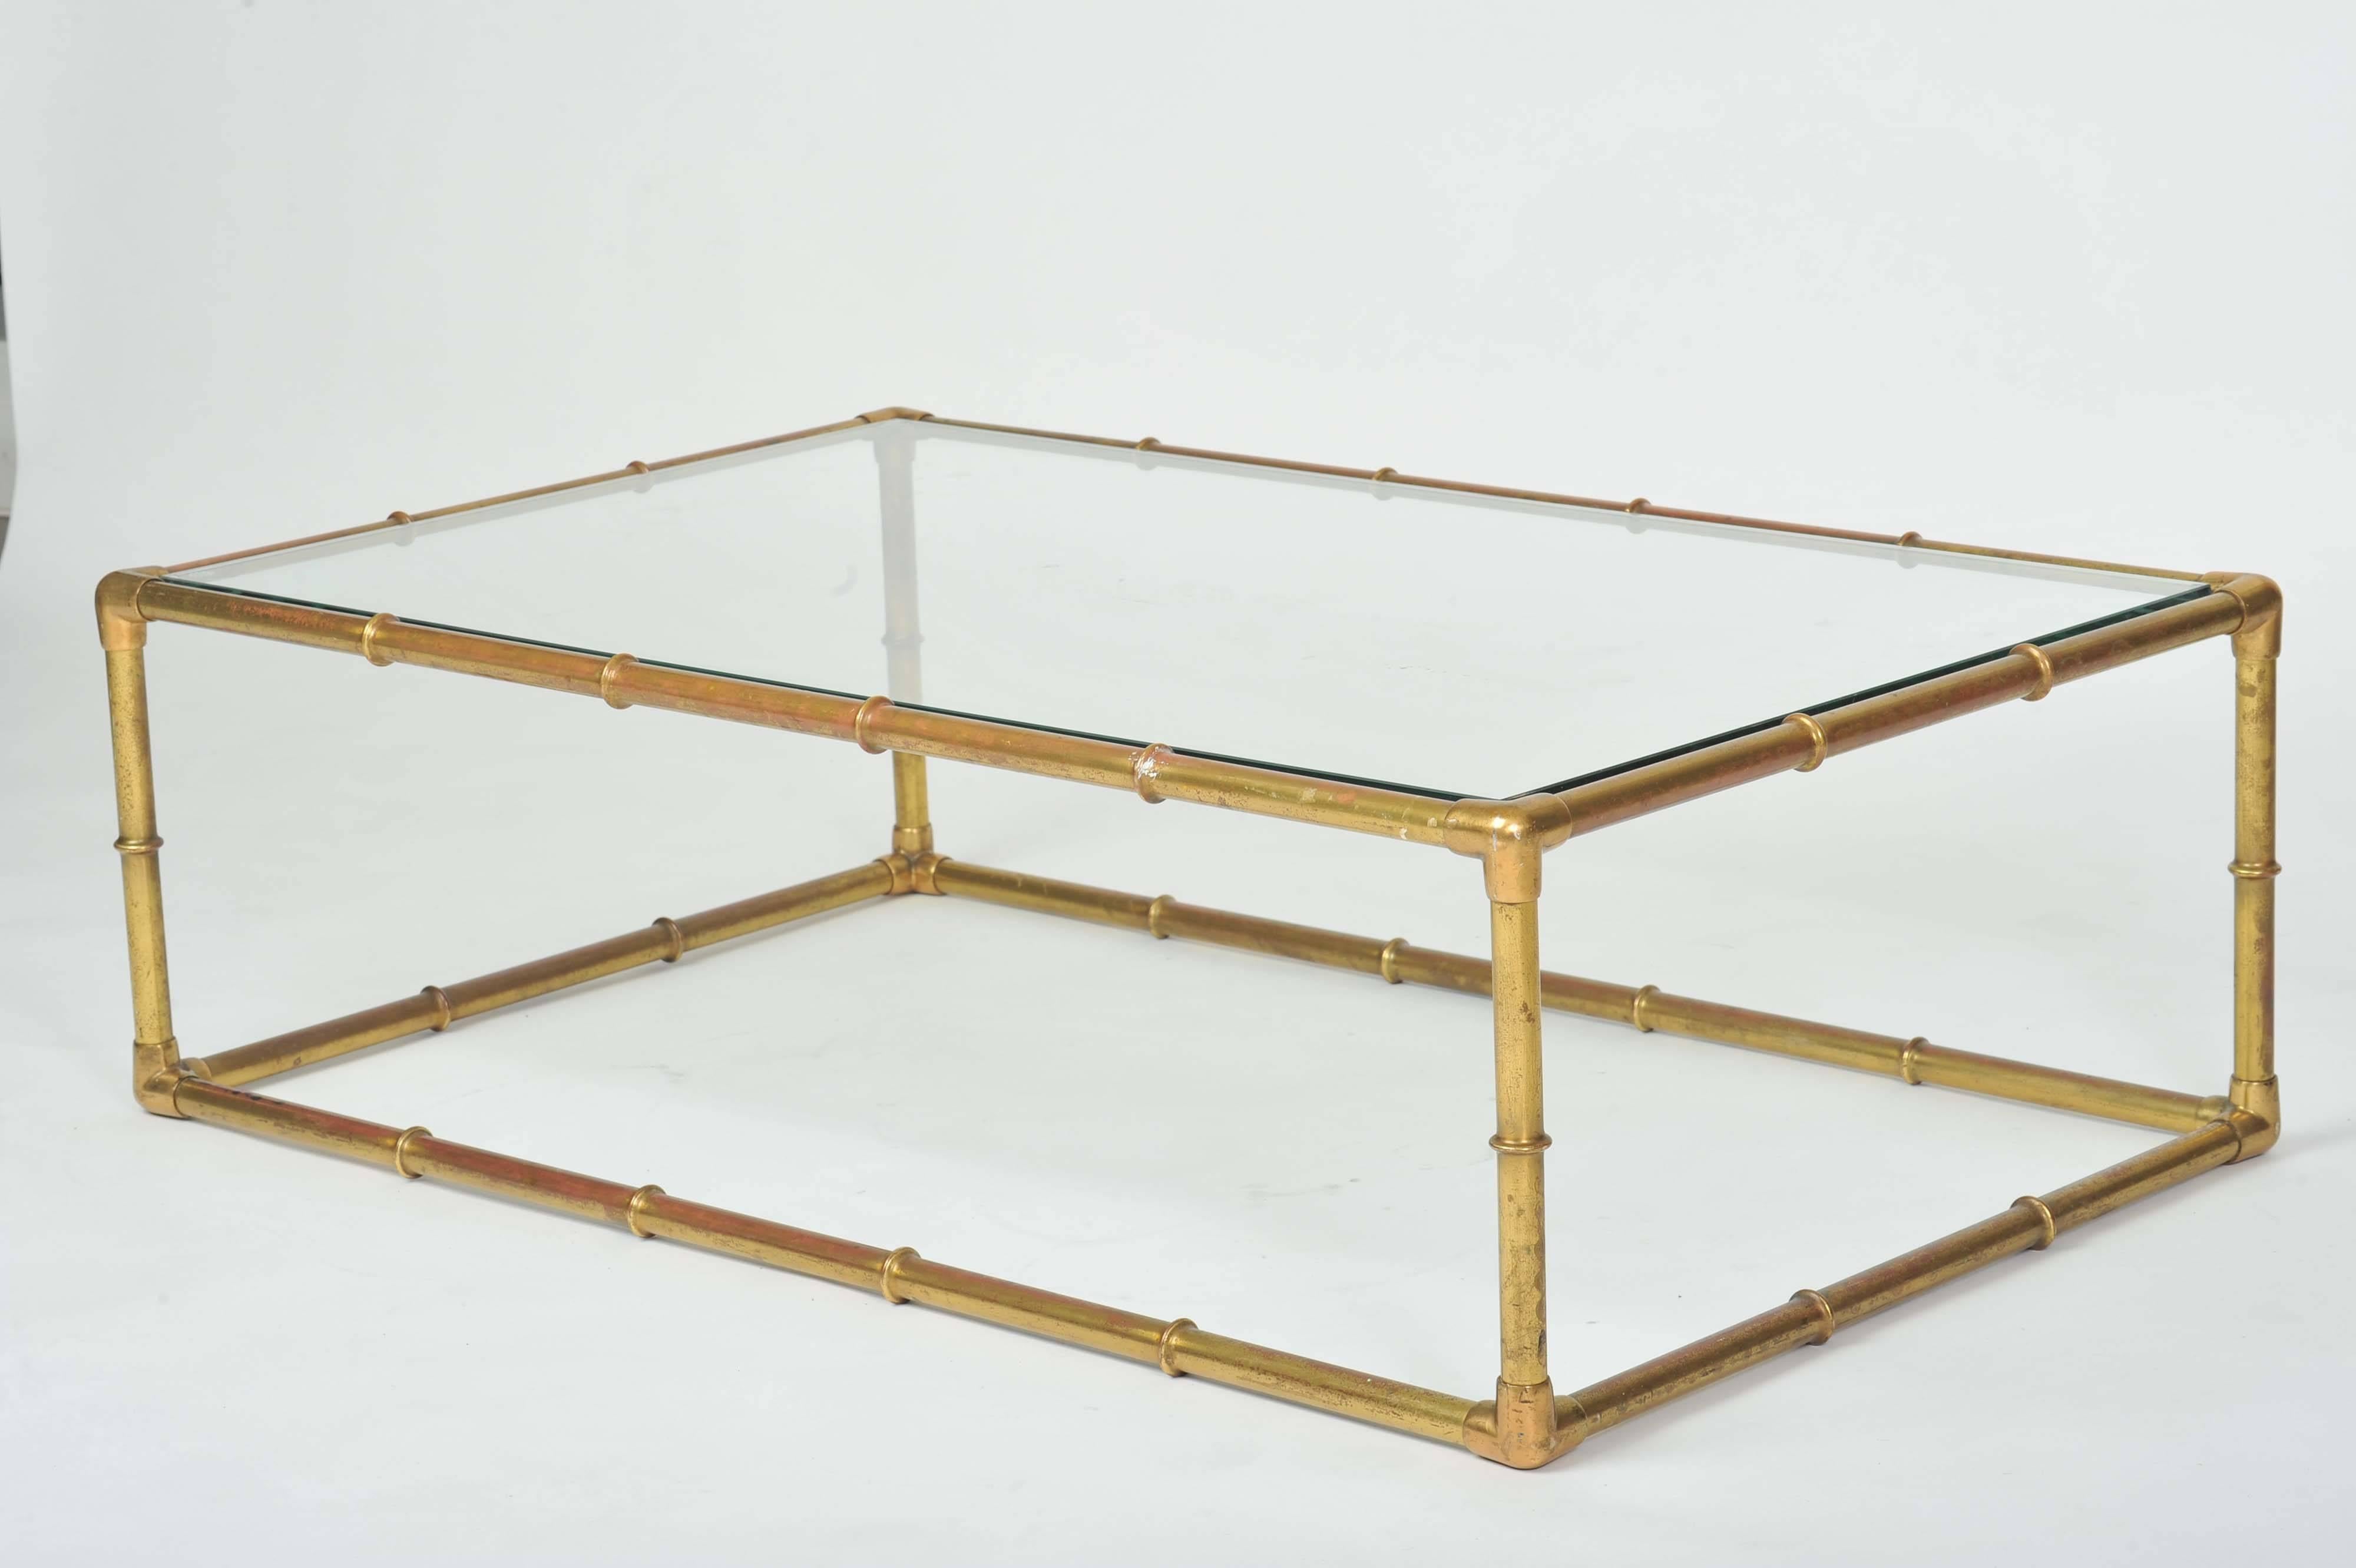 Bamboo effect lounge table frame is made of brass-plated copper and has a natural patina of age. The inset glass top is toughened.

